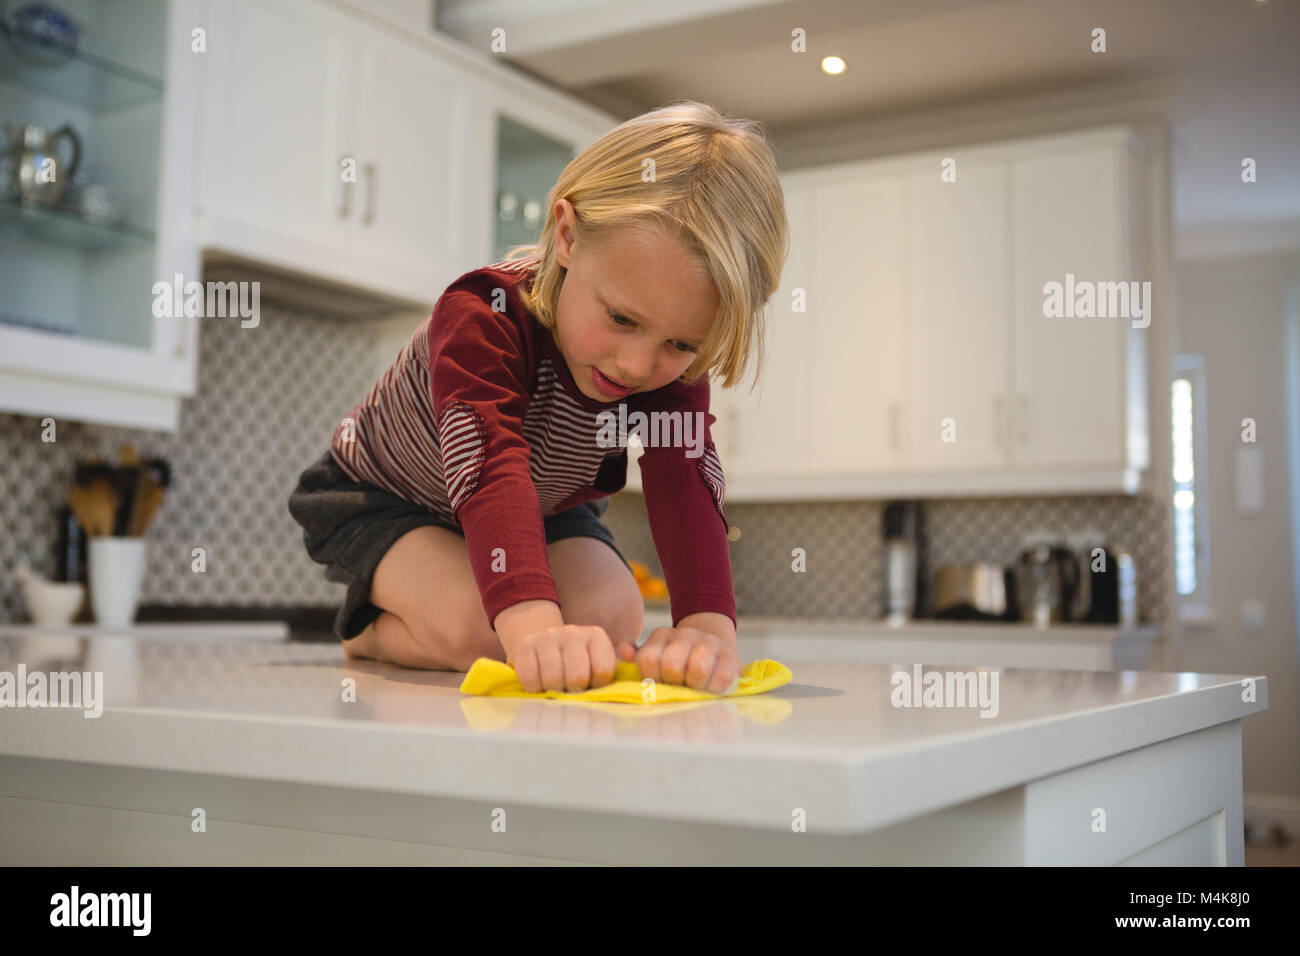 Boy cleaning kitchen worktop with rag Stock Photo